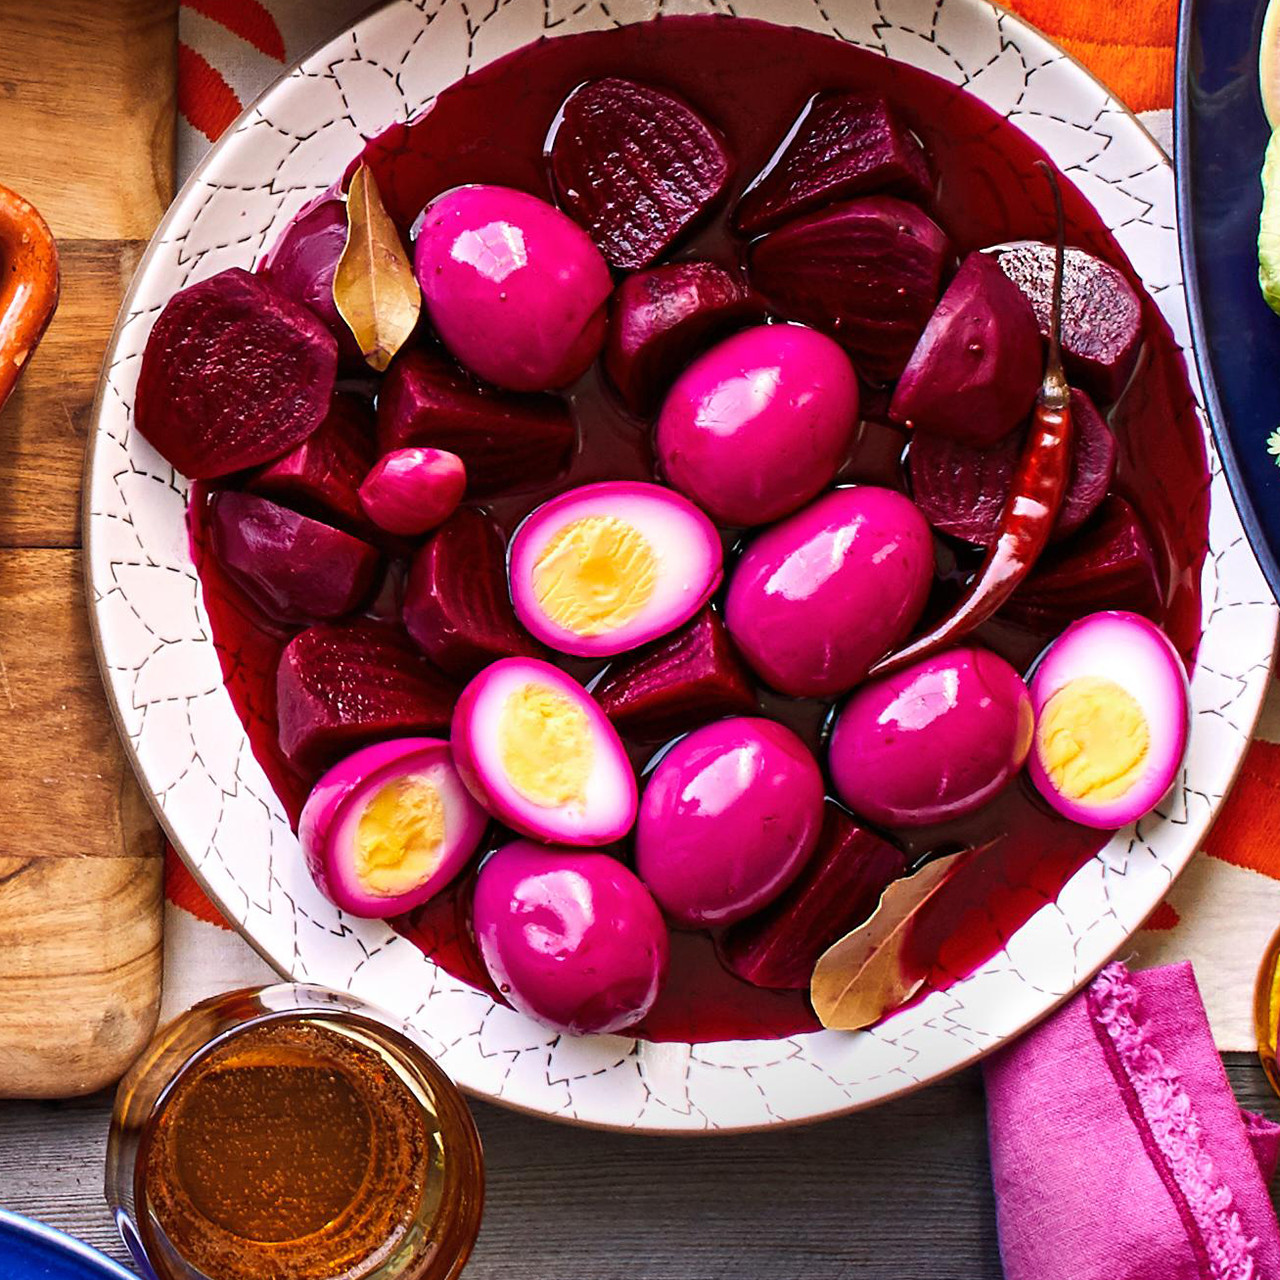 Best Pickled Eggs Awesome Best Pickled Eggs and Beets Recipe Akzamkowy